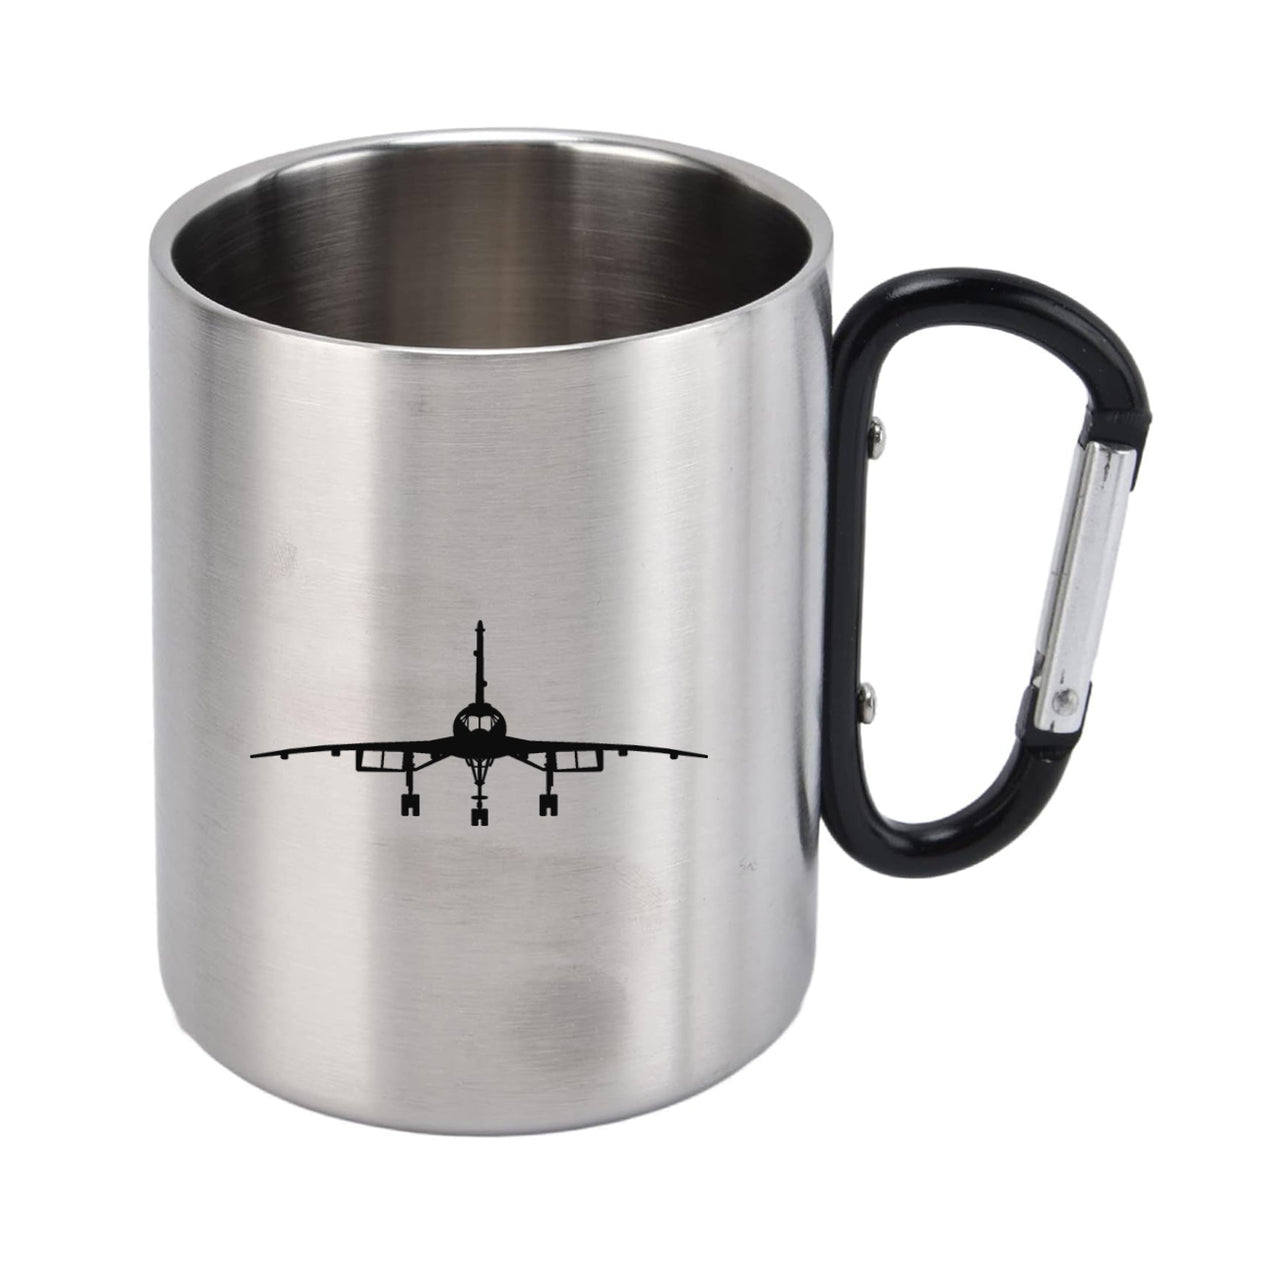 Concorde Silhouette Designed Stainless Steel Outdoors Mugs